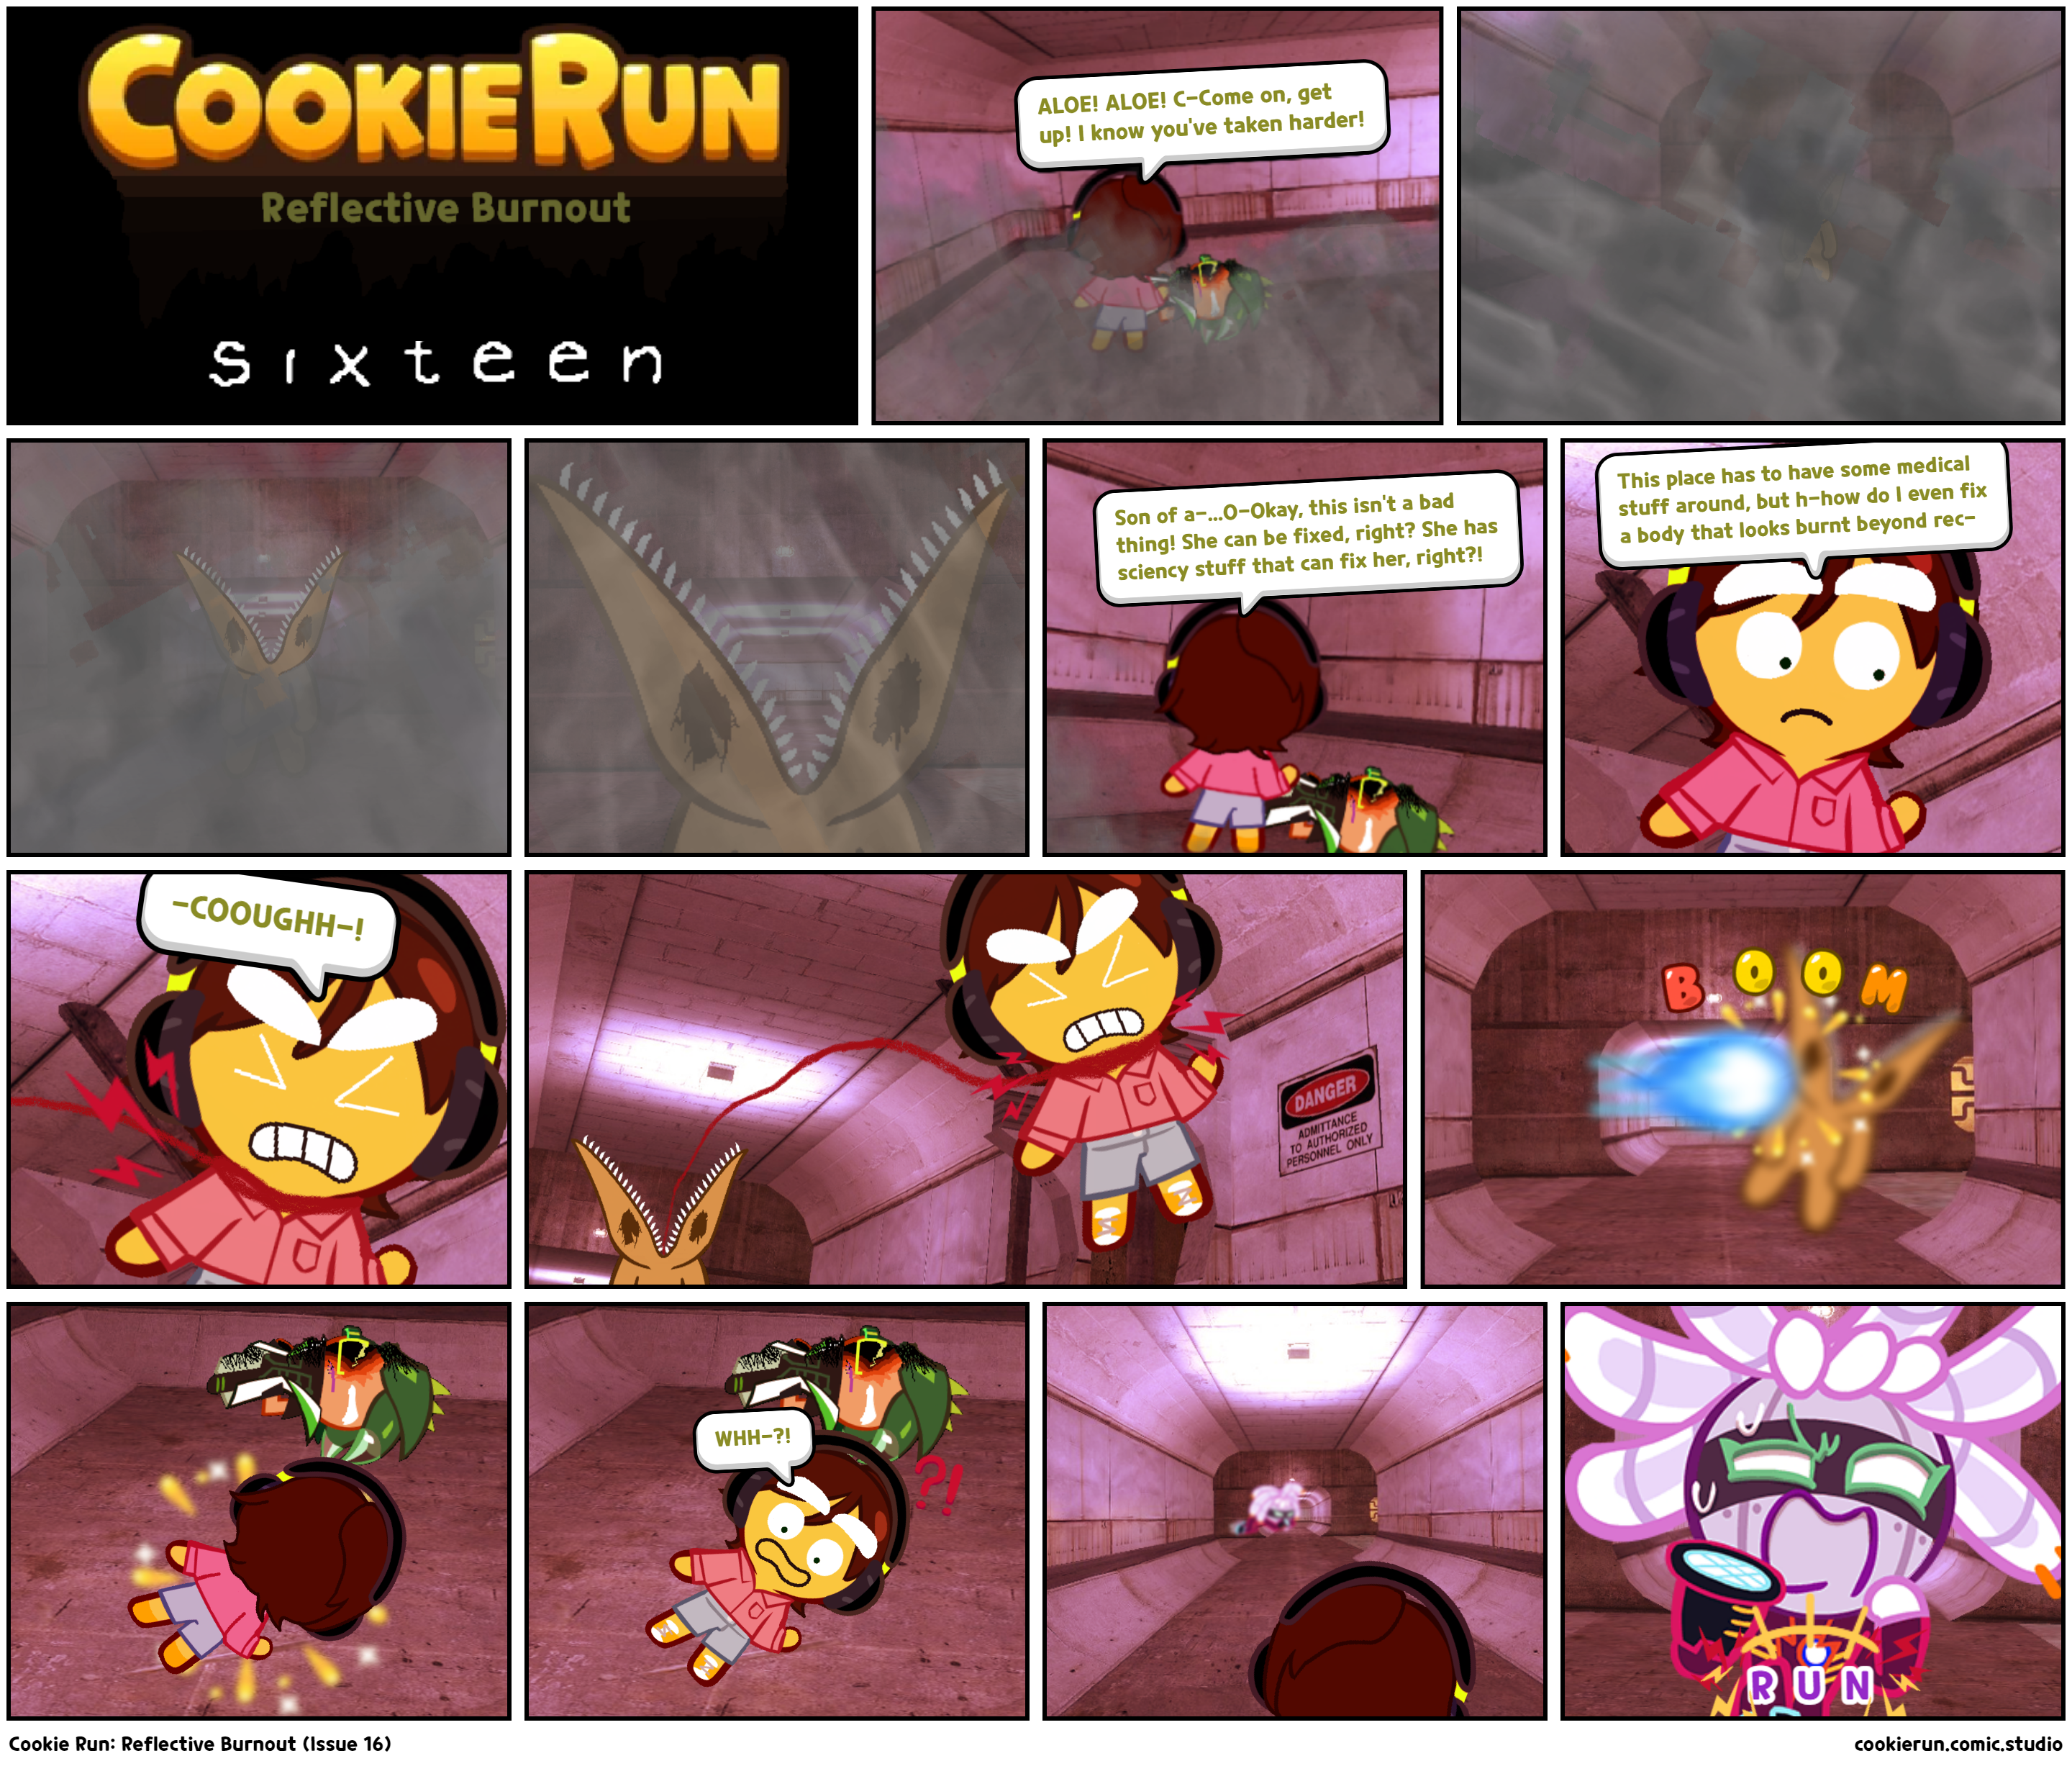 Cookie Run: Reflective Burnout (Issue 16)